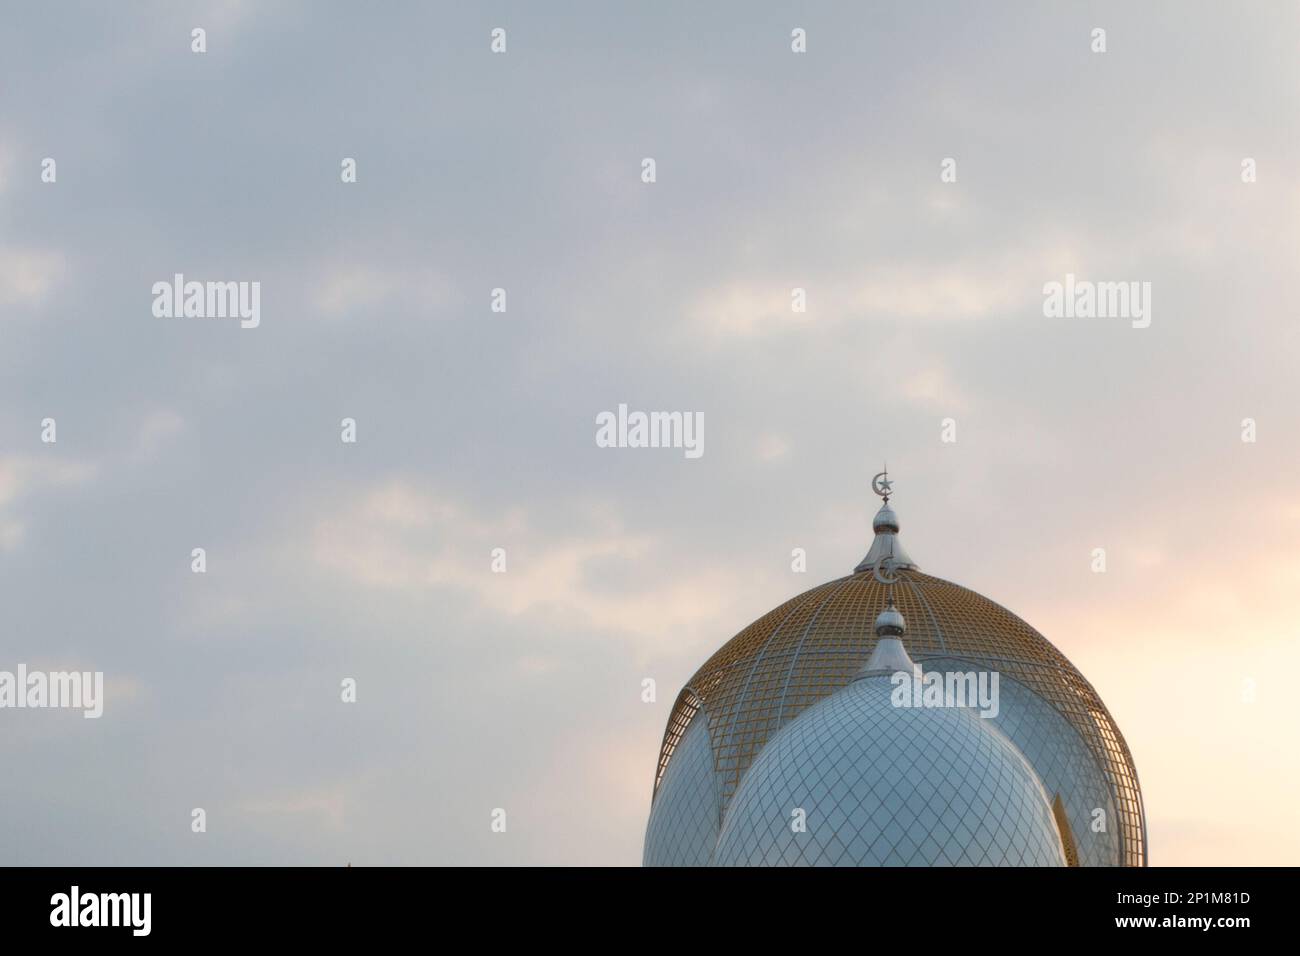 The dome of the mosque with copy space for fill text, Ramadan and Islamic greeting concept Stock Photo